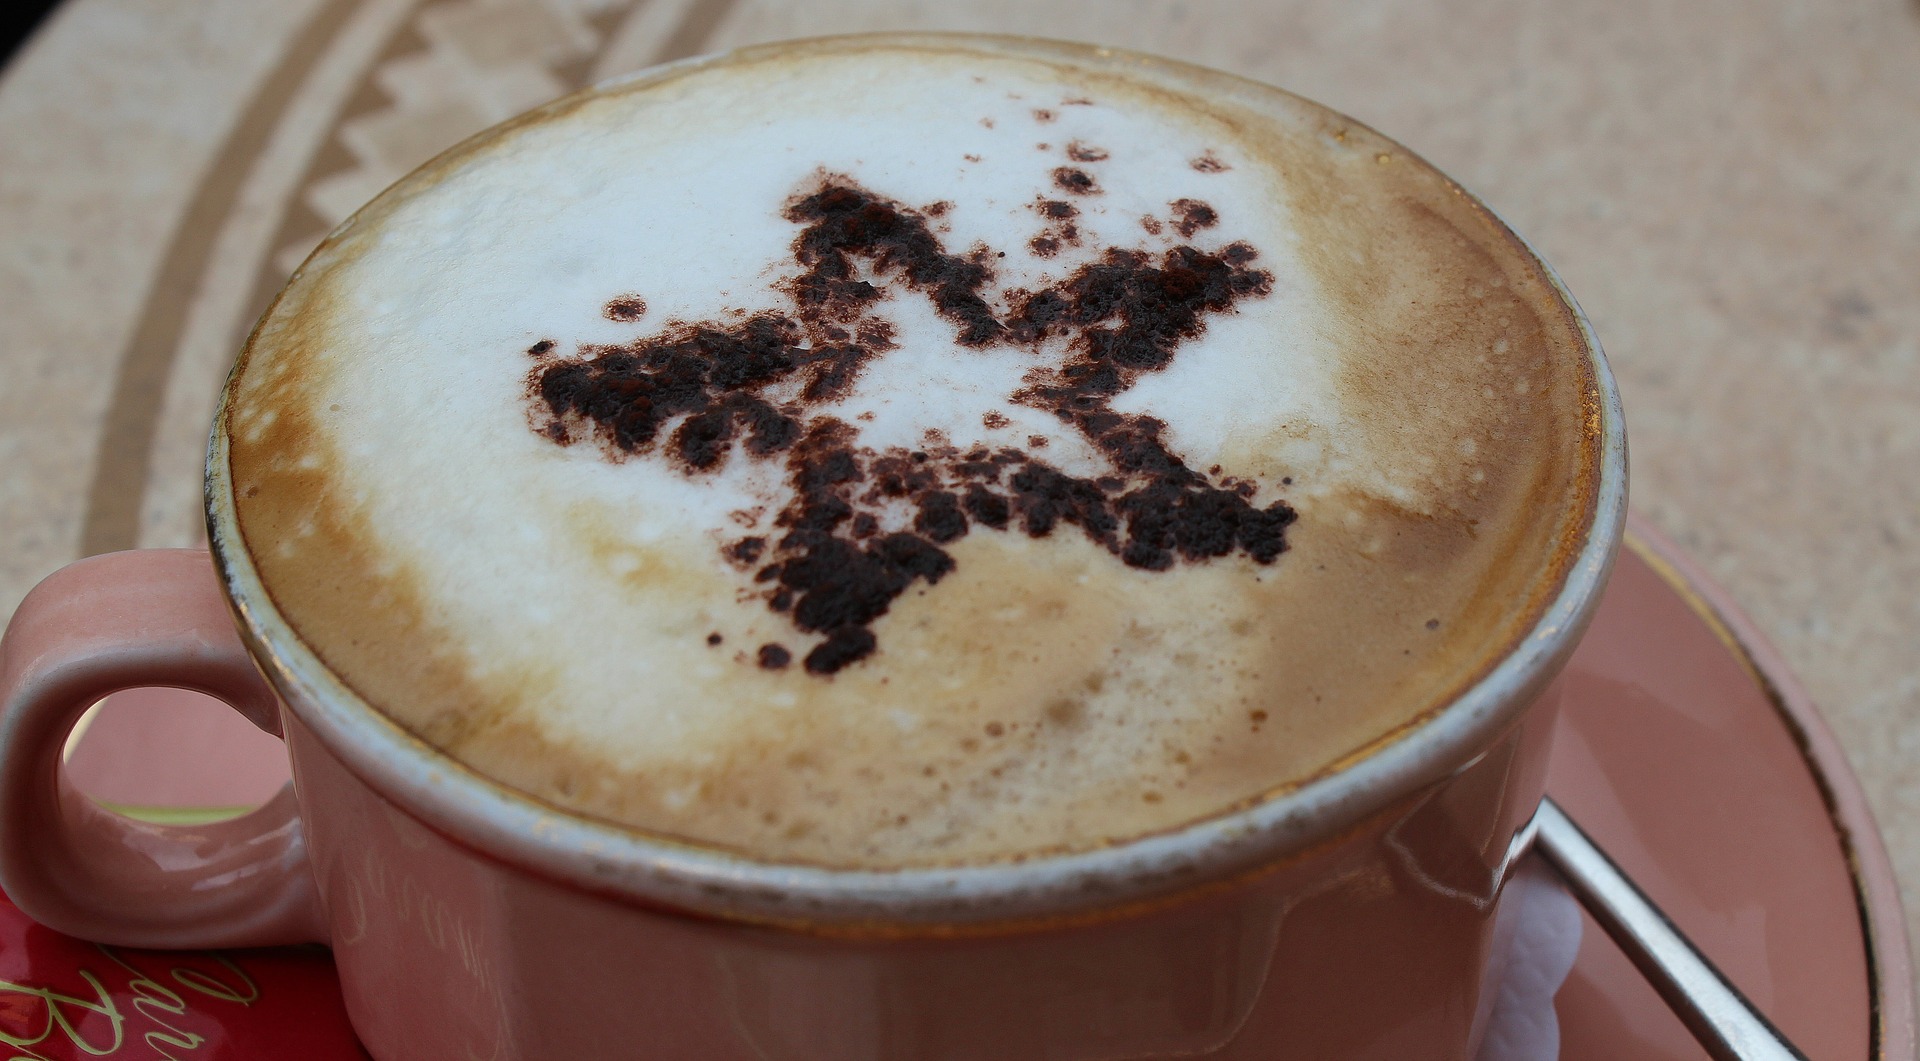 Frothy cappuccino with star on top